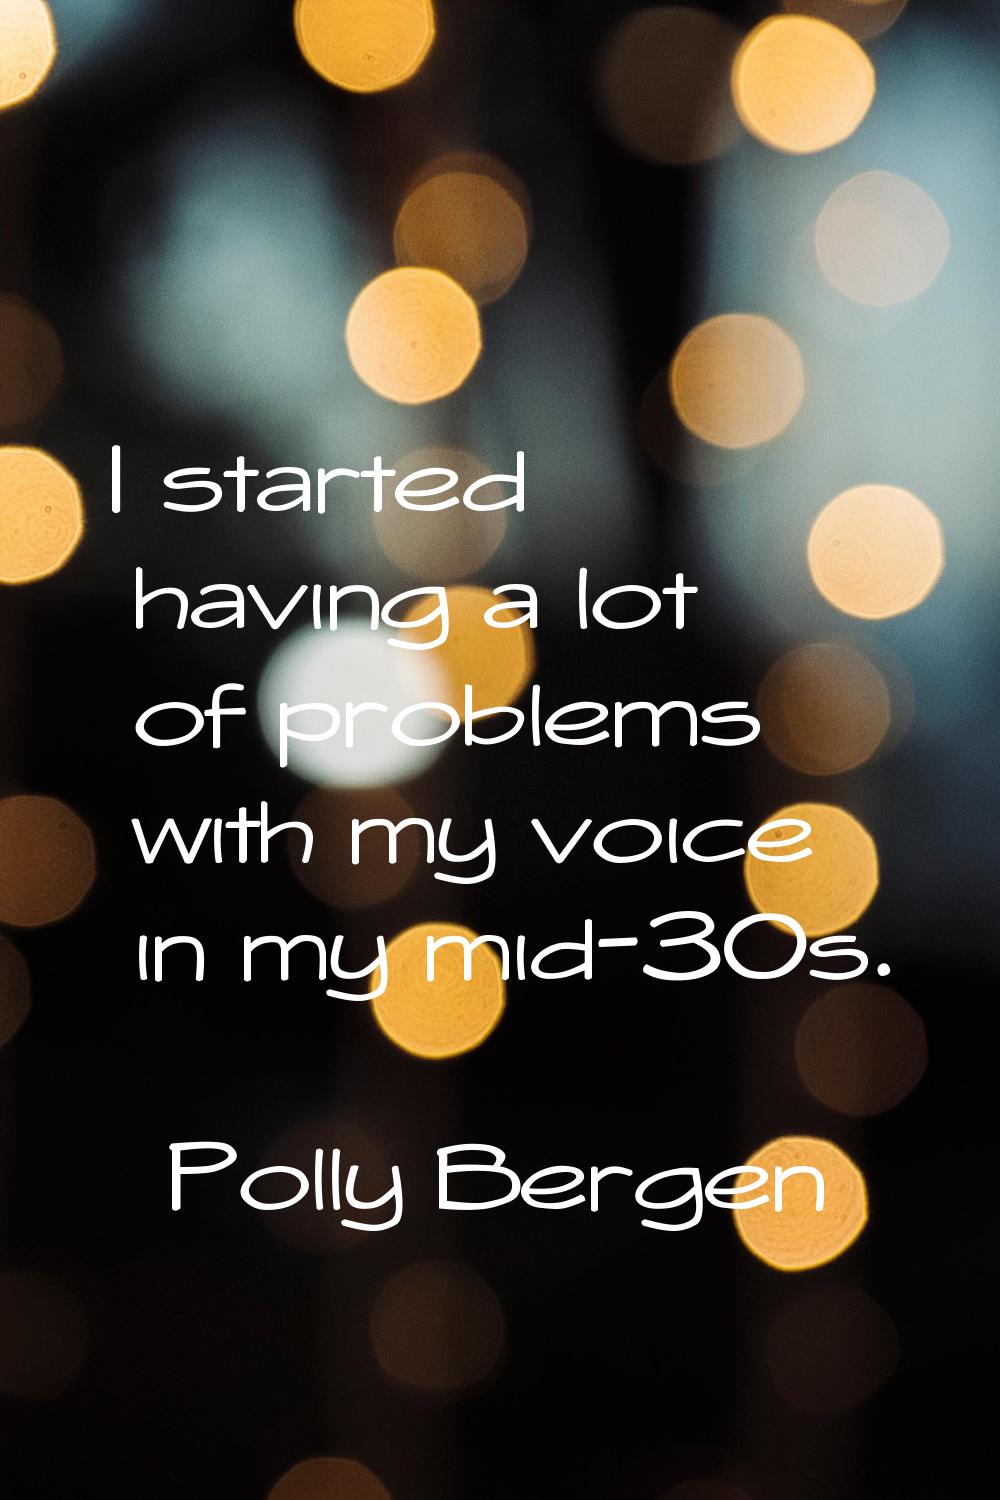 I started having a lot of problems with my voice in my mid-30s.